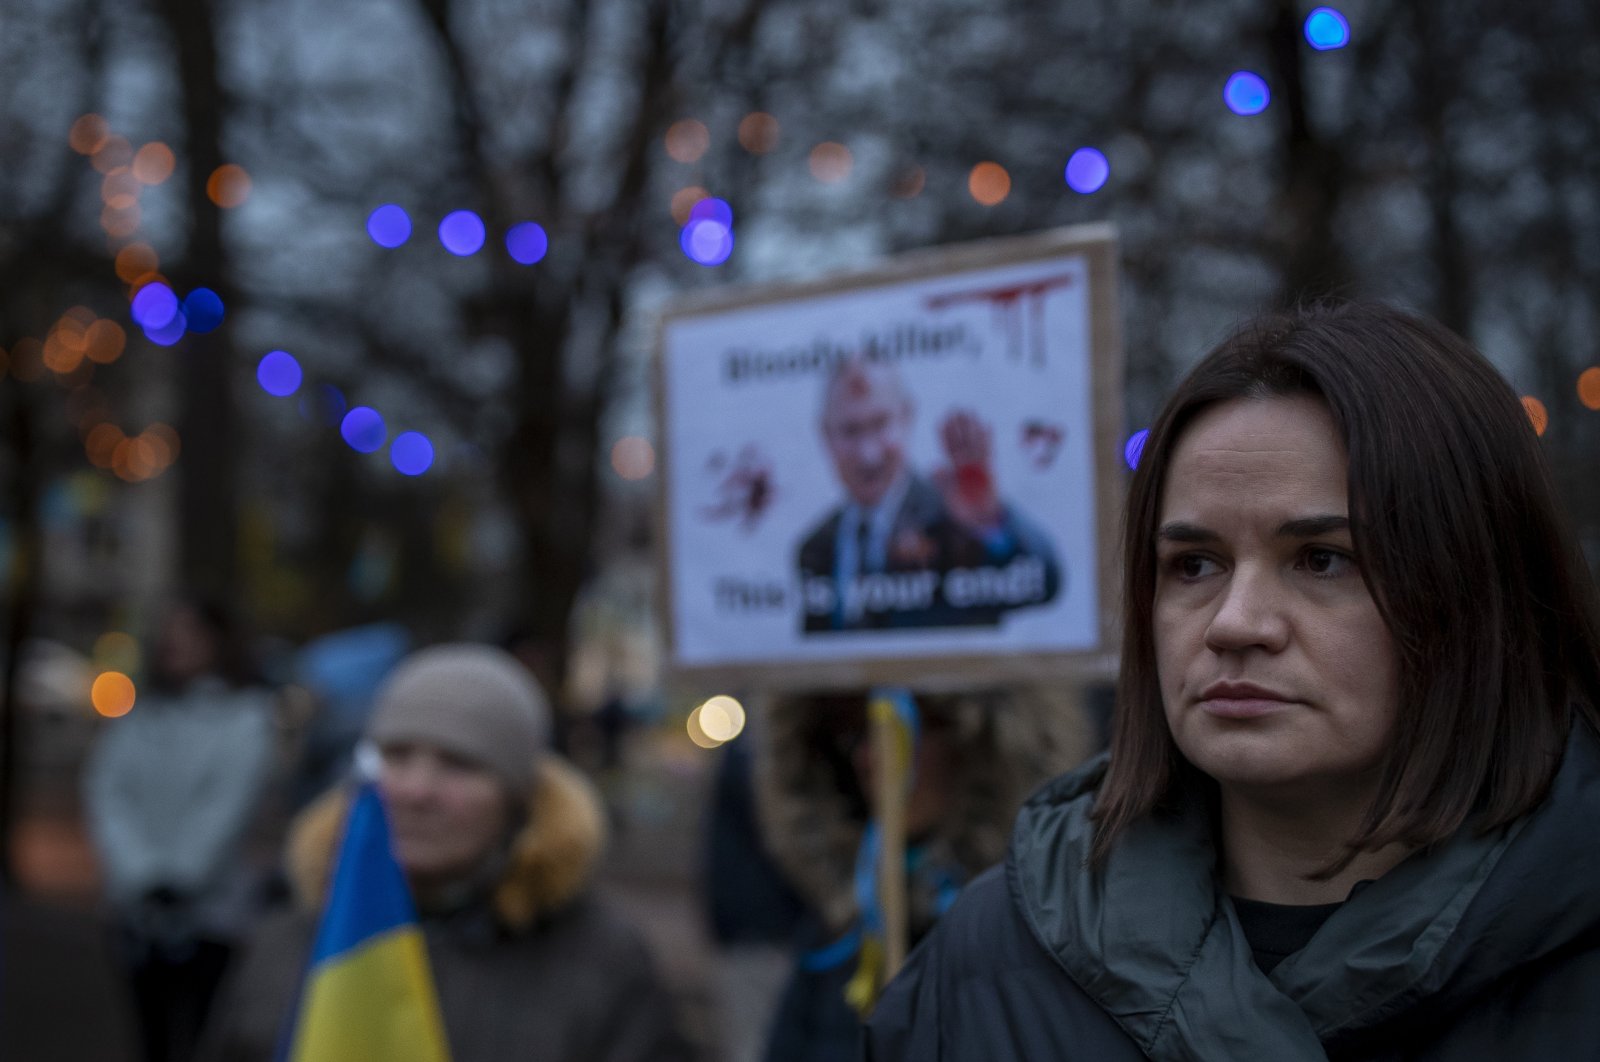 Belarusian opposition leader Sviatlana Tsikhanouskaya, (R), takes part in a protest against the Russian invasion of Ukraine in front of the Russian Embassy in Vilnius, Lithuania, March 4, 2022. (AP Photo)